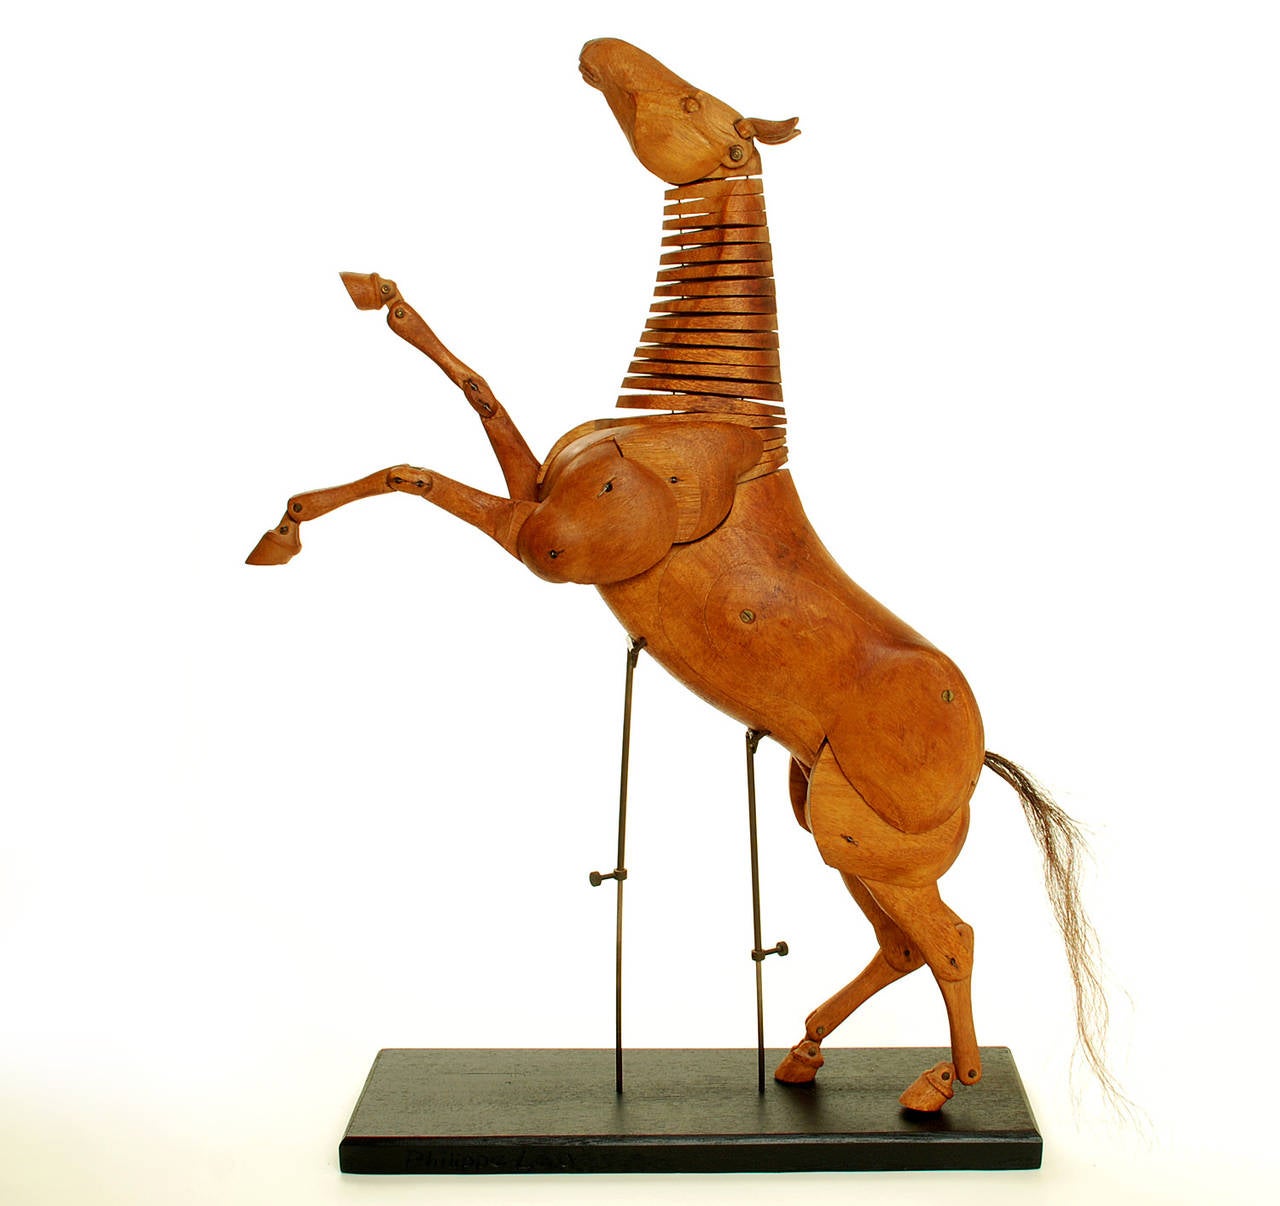 20th Century Fully Articulated Artist's Model of a Horse, Signed